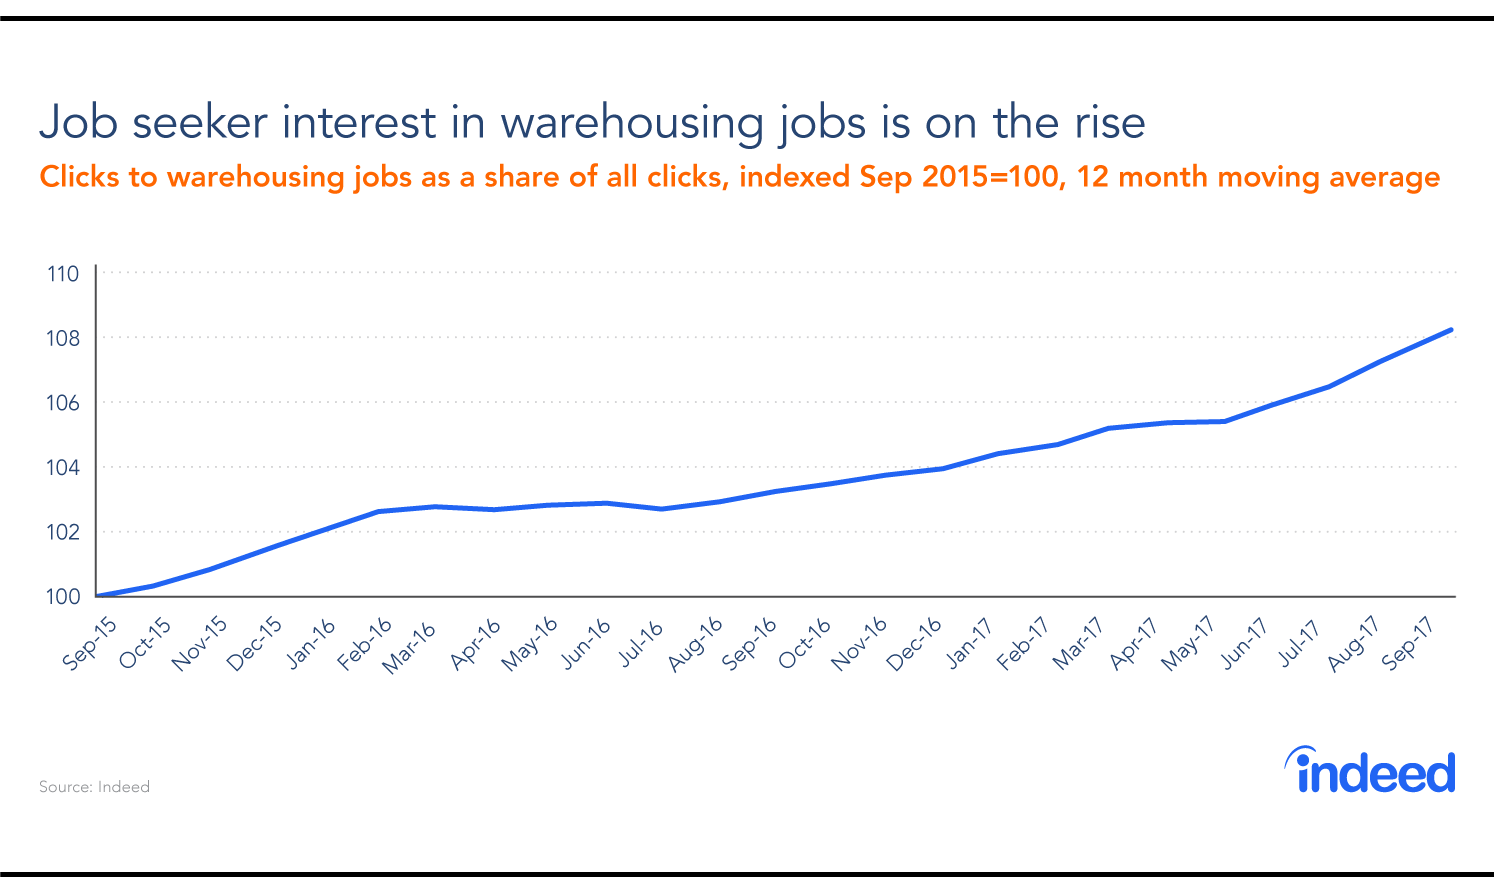 Searches for warehousing jobs grew rapidly over the past year